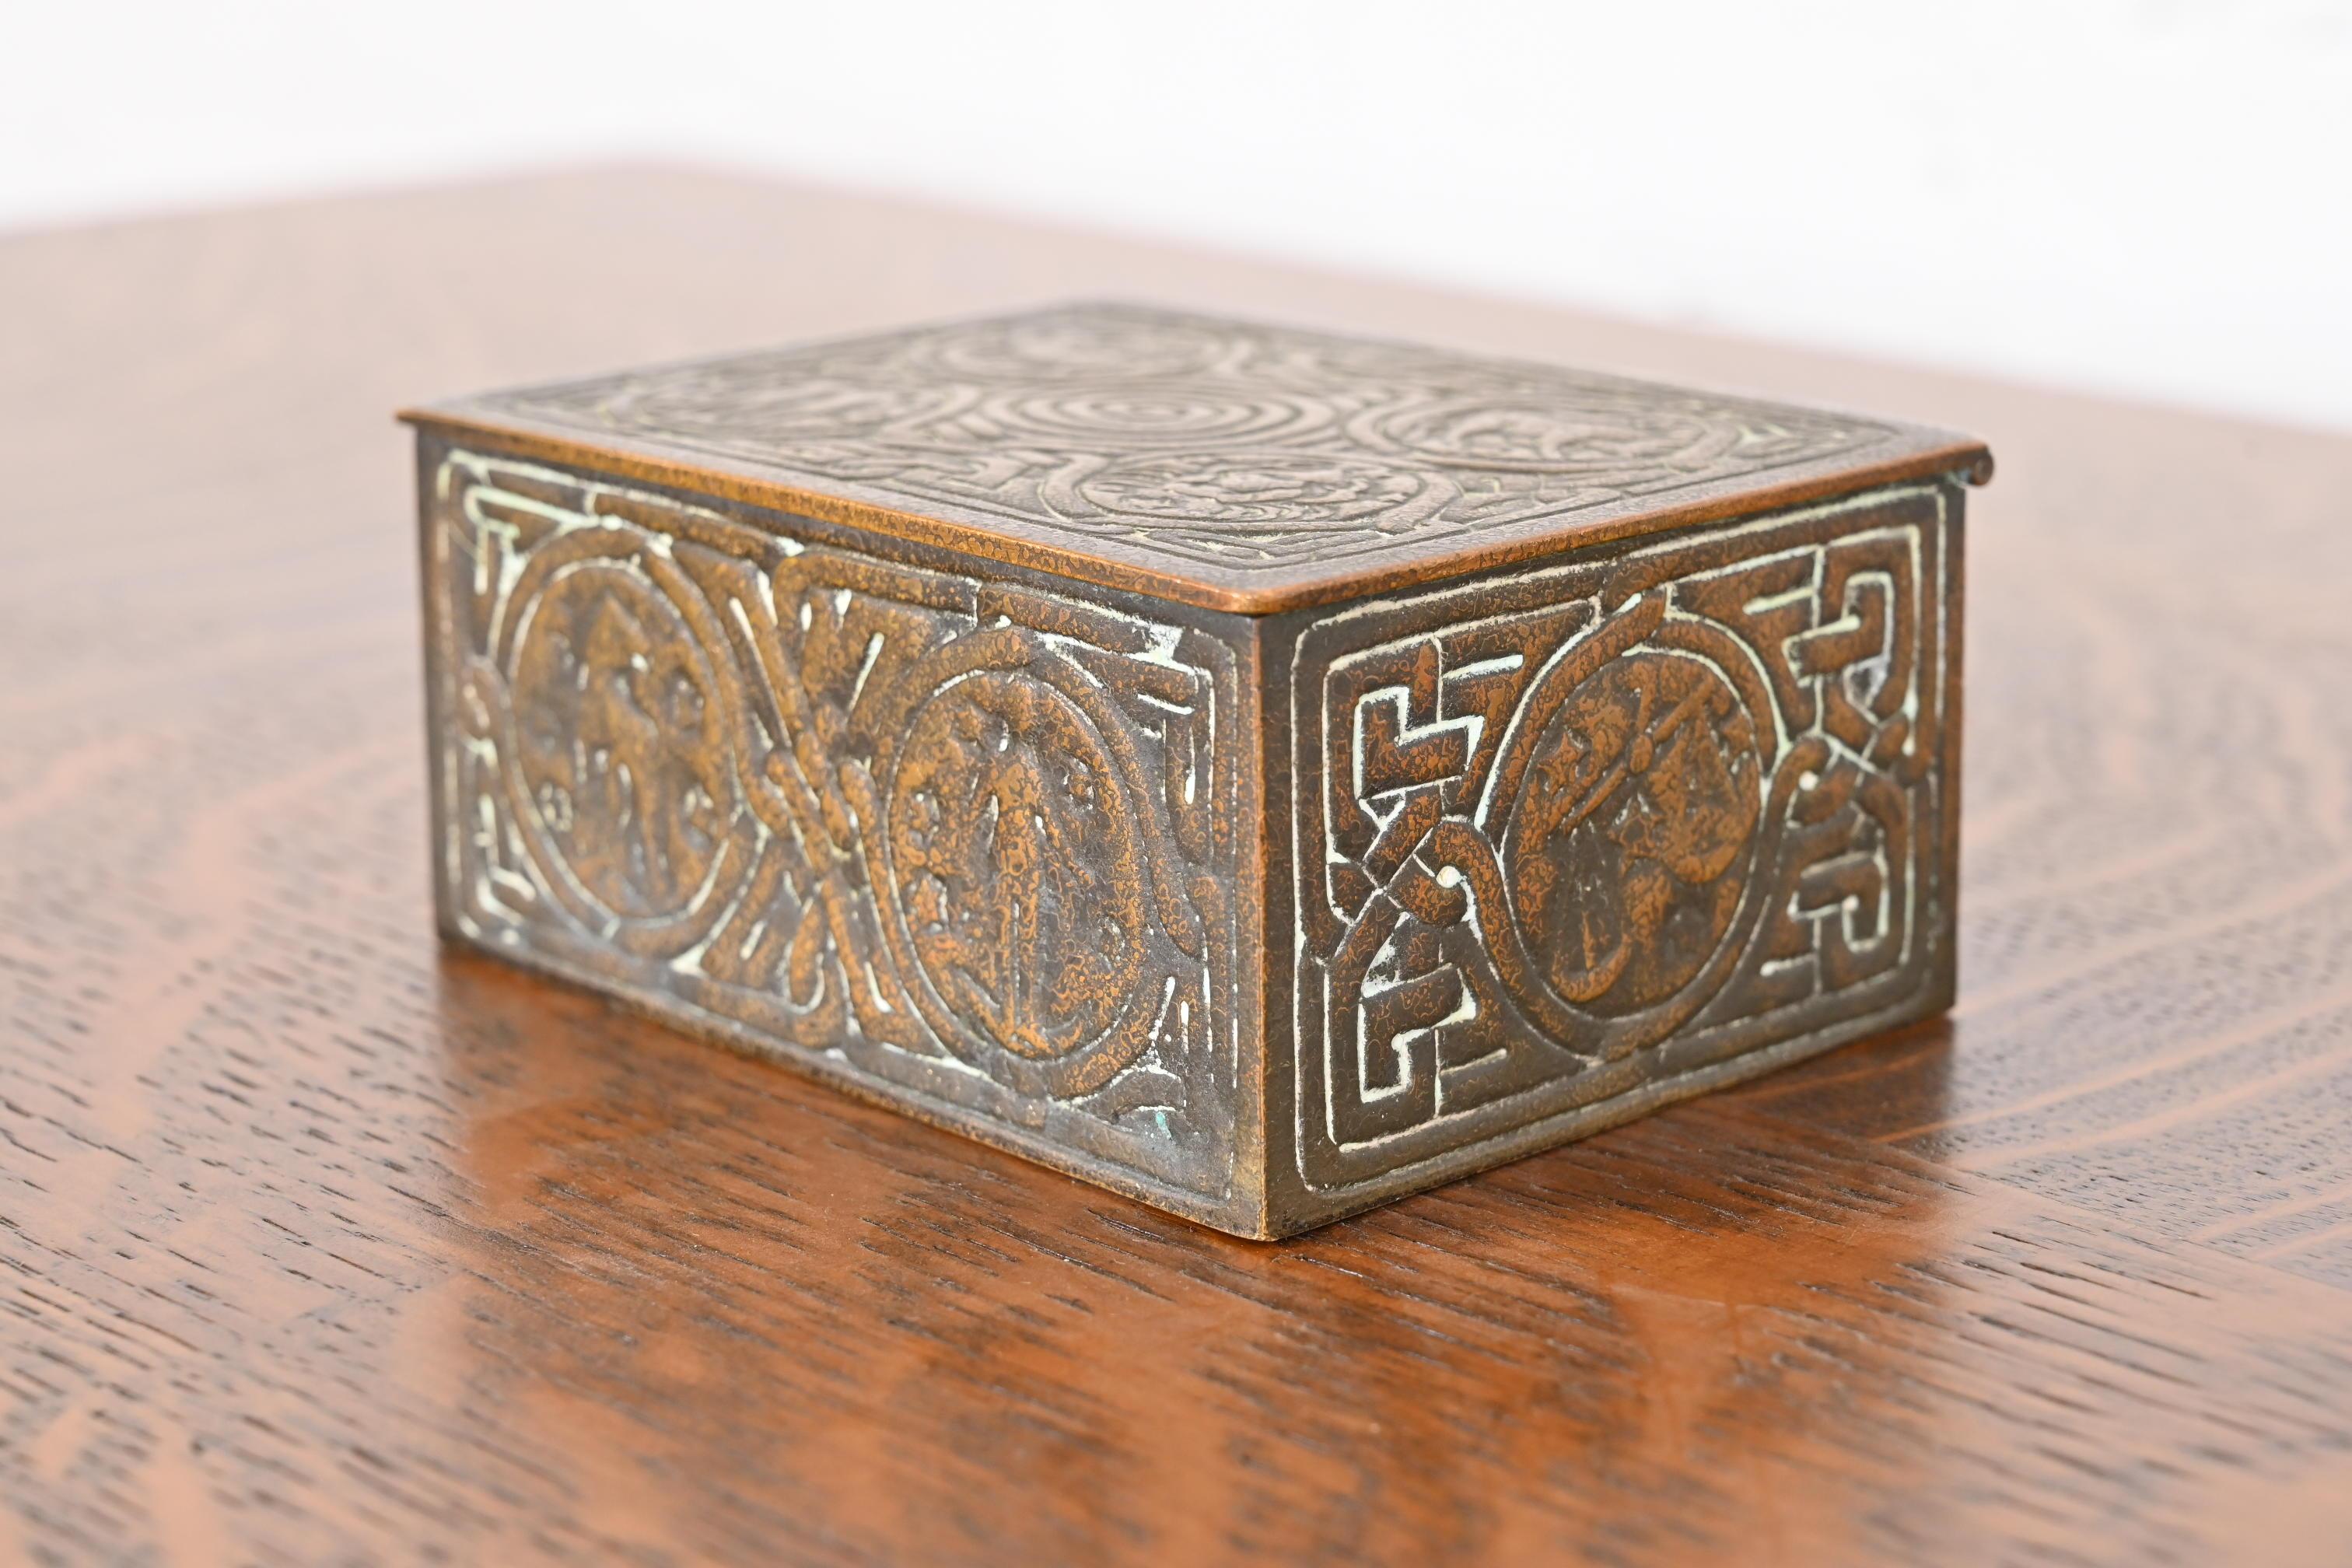 A gorgeous bronze desk box, jewelry box, or decorative box featuring Zodiac designs

By Tiffany Studios

New York, USA, Early 20th century

Measures: 4.5